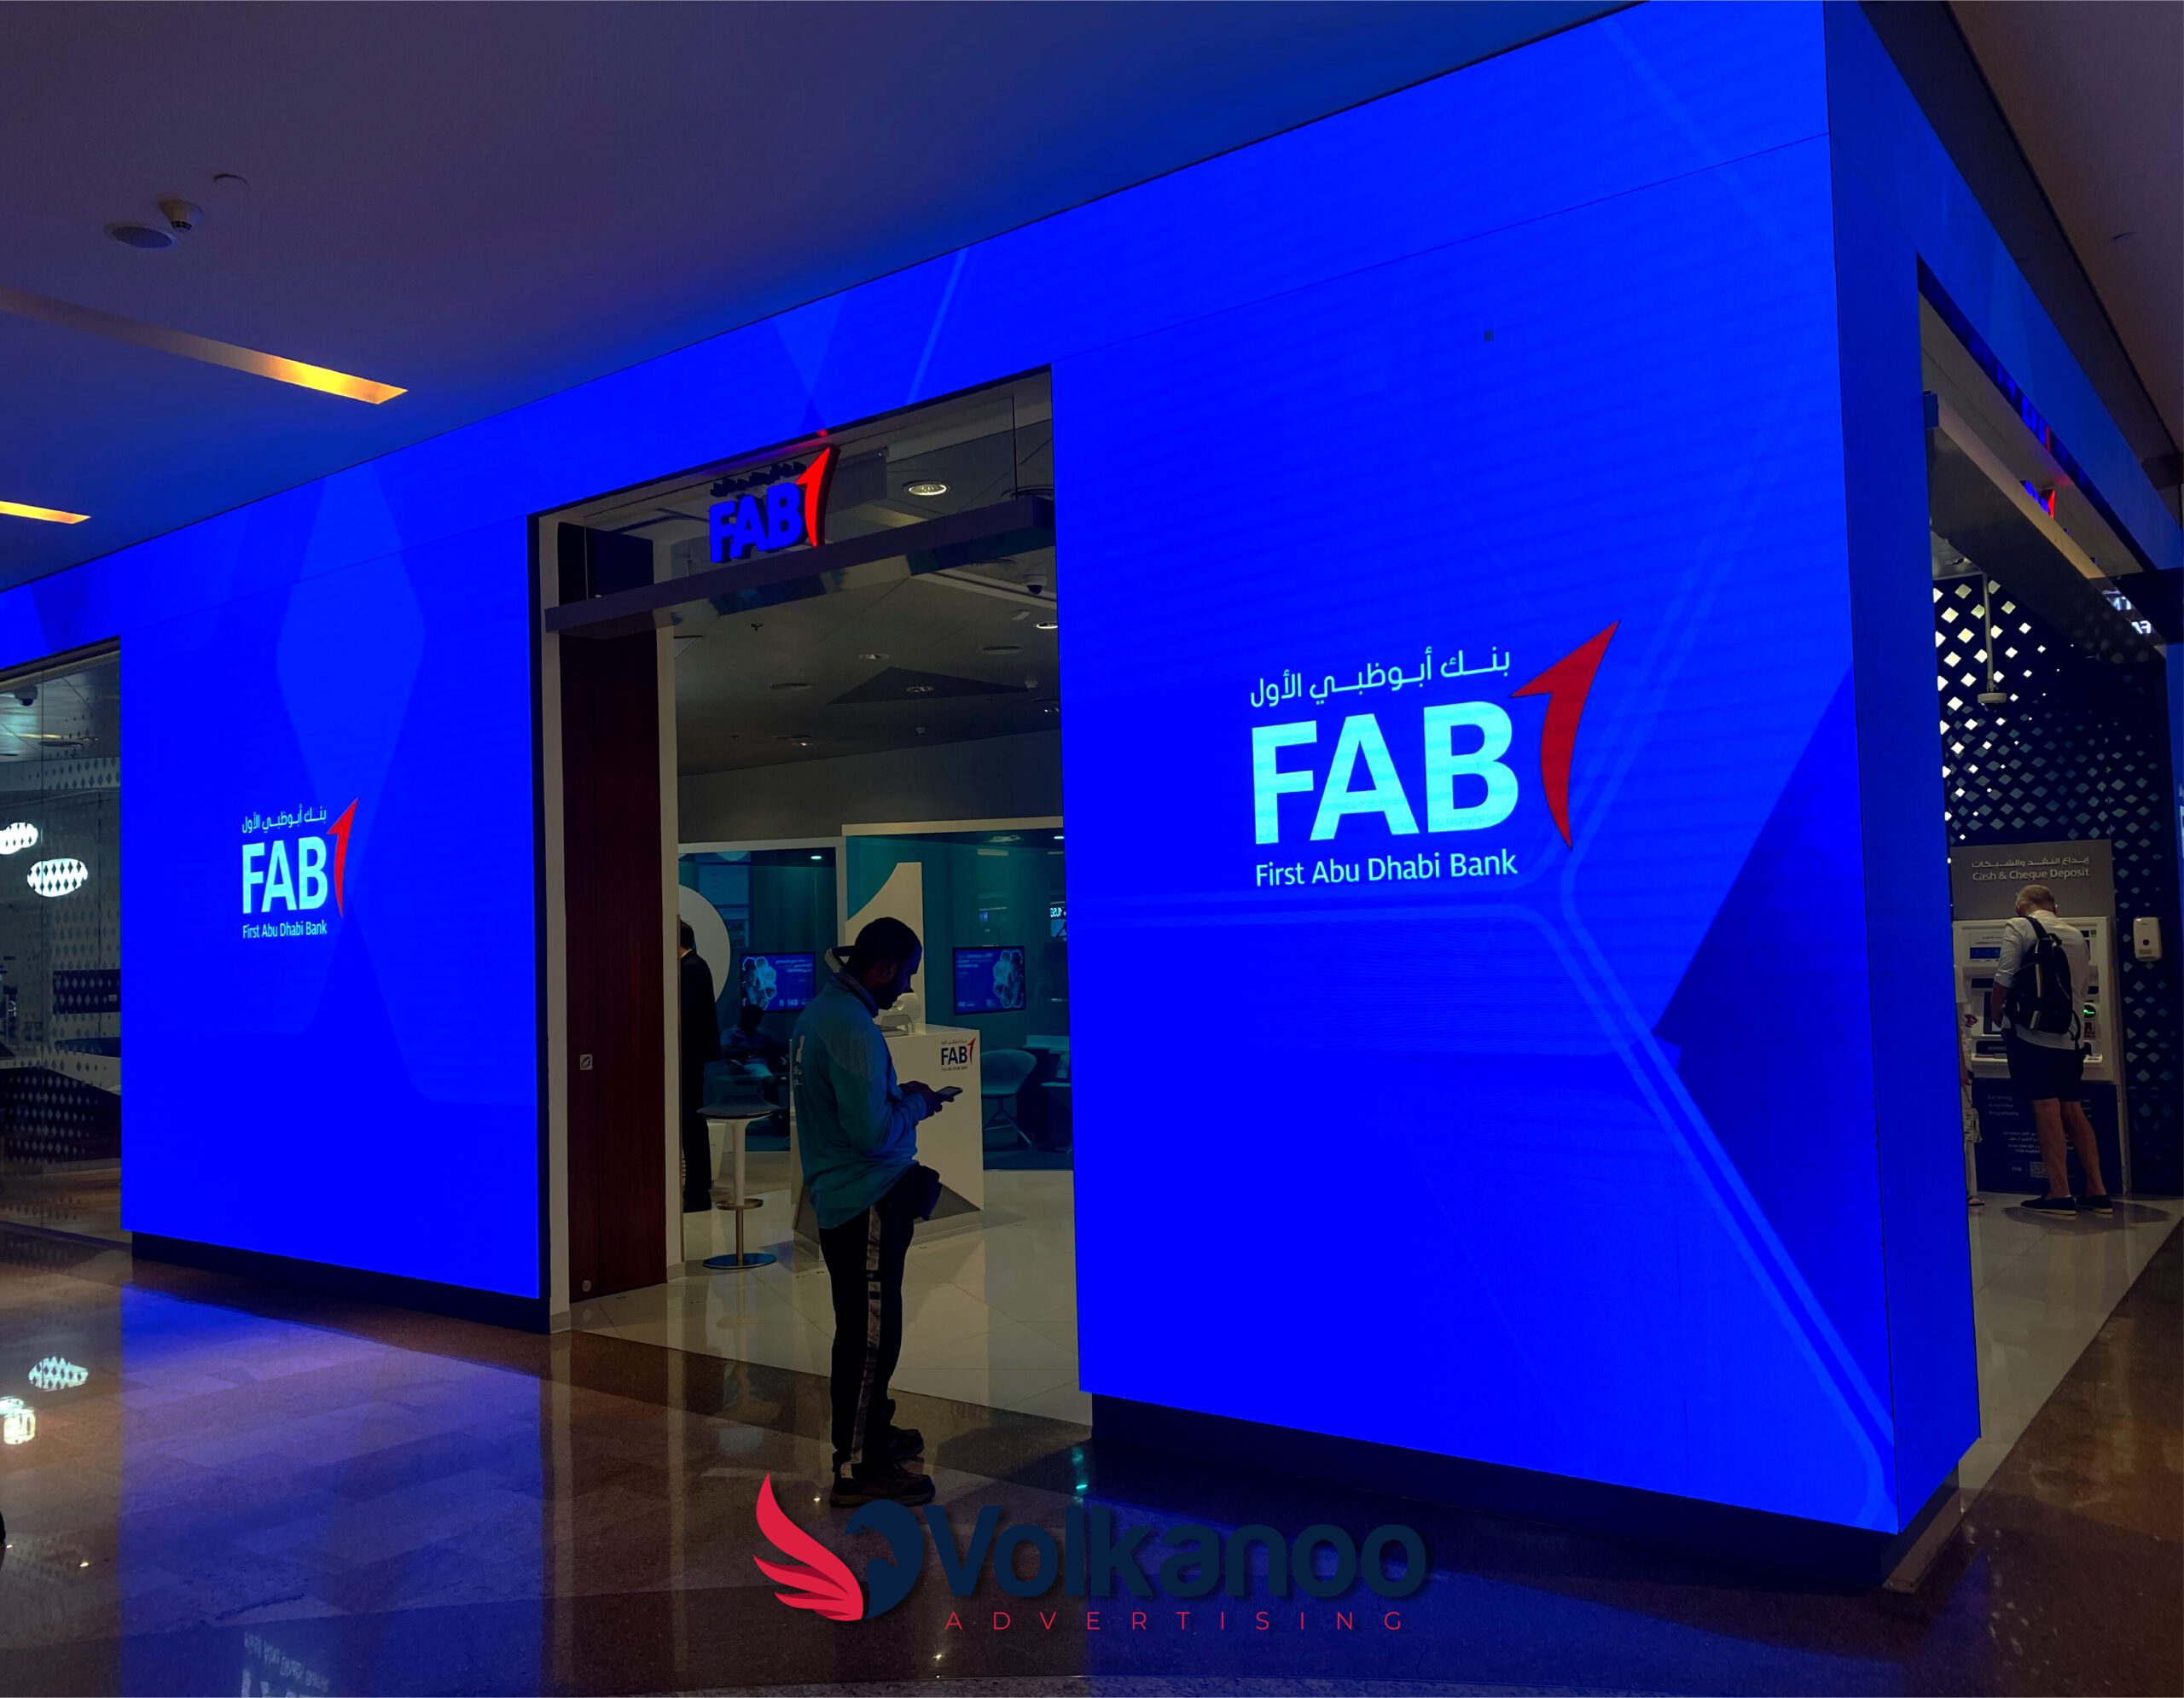 Custom indoor LED screen supplied by a leading LED screen supplier in Dubai, showcasing vibrant and high-resolution display capabilities